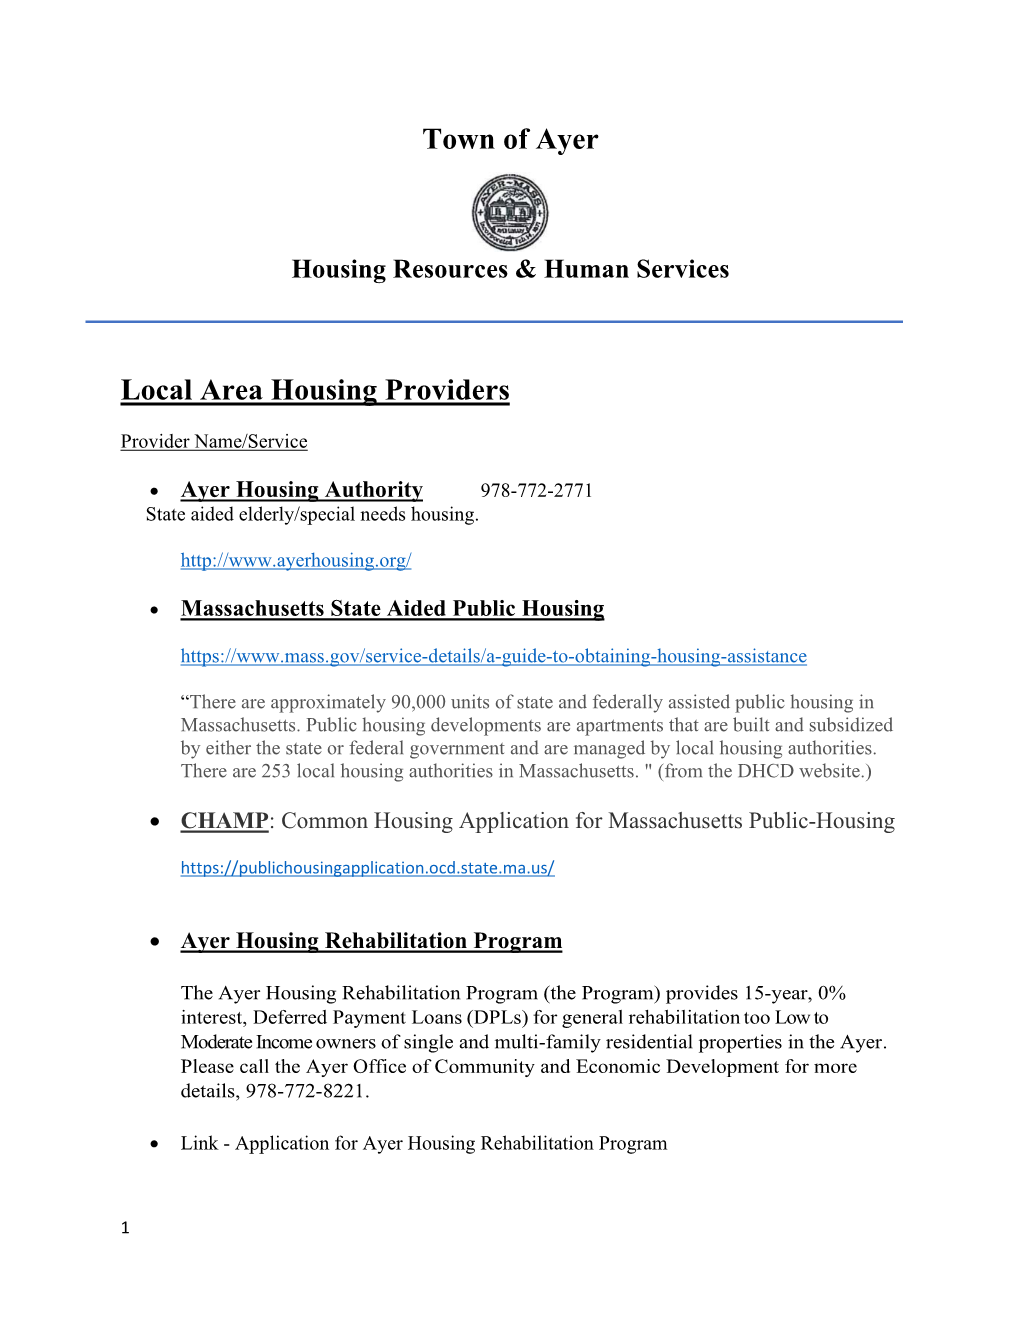 Housing Resources & Human Services